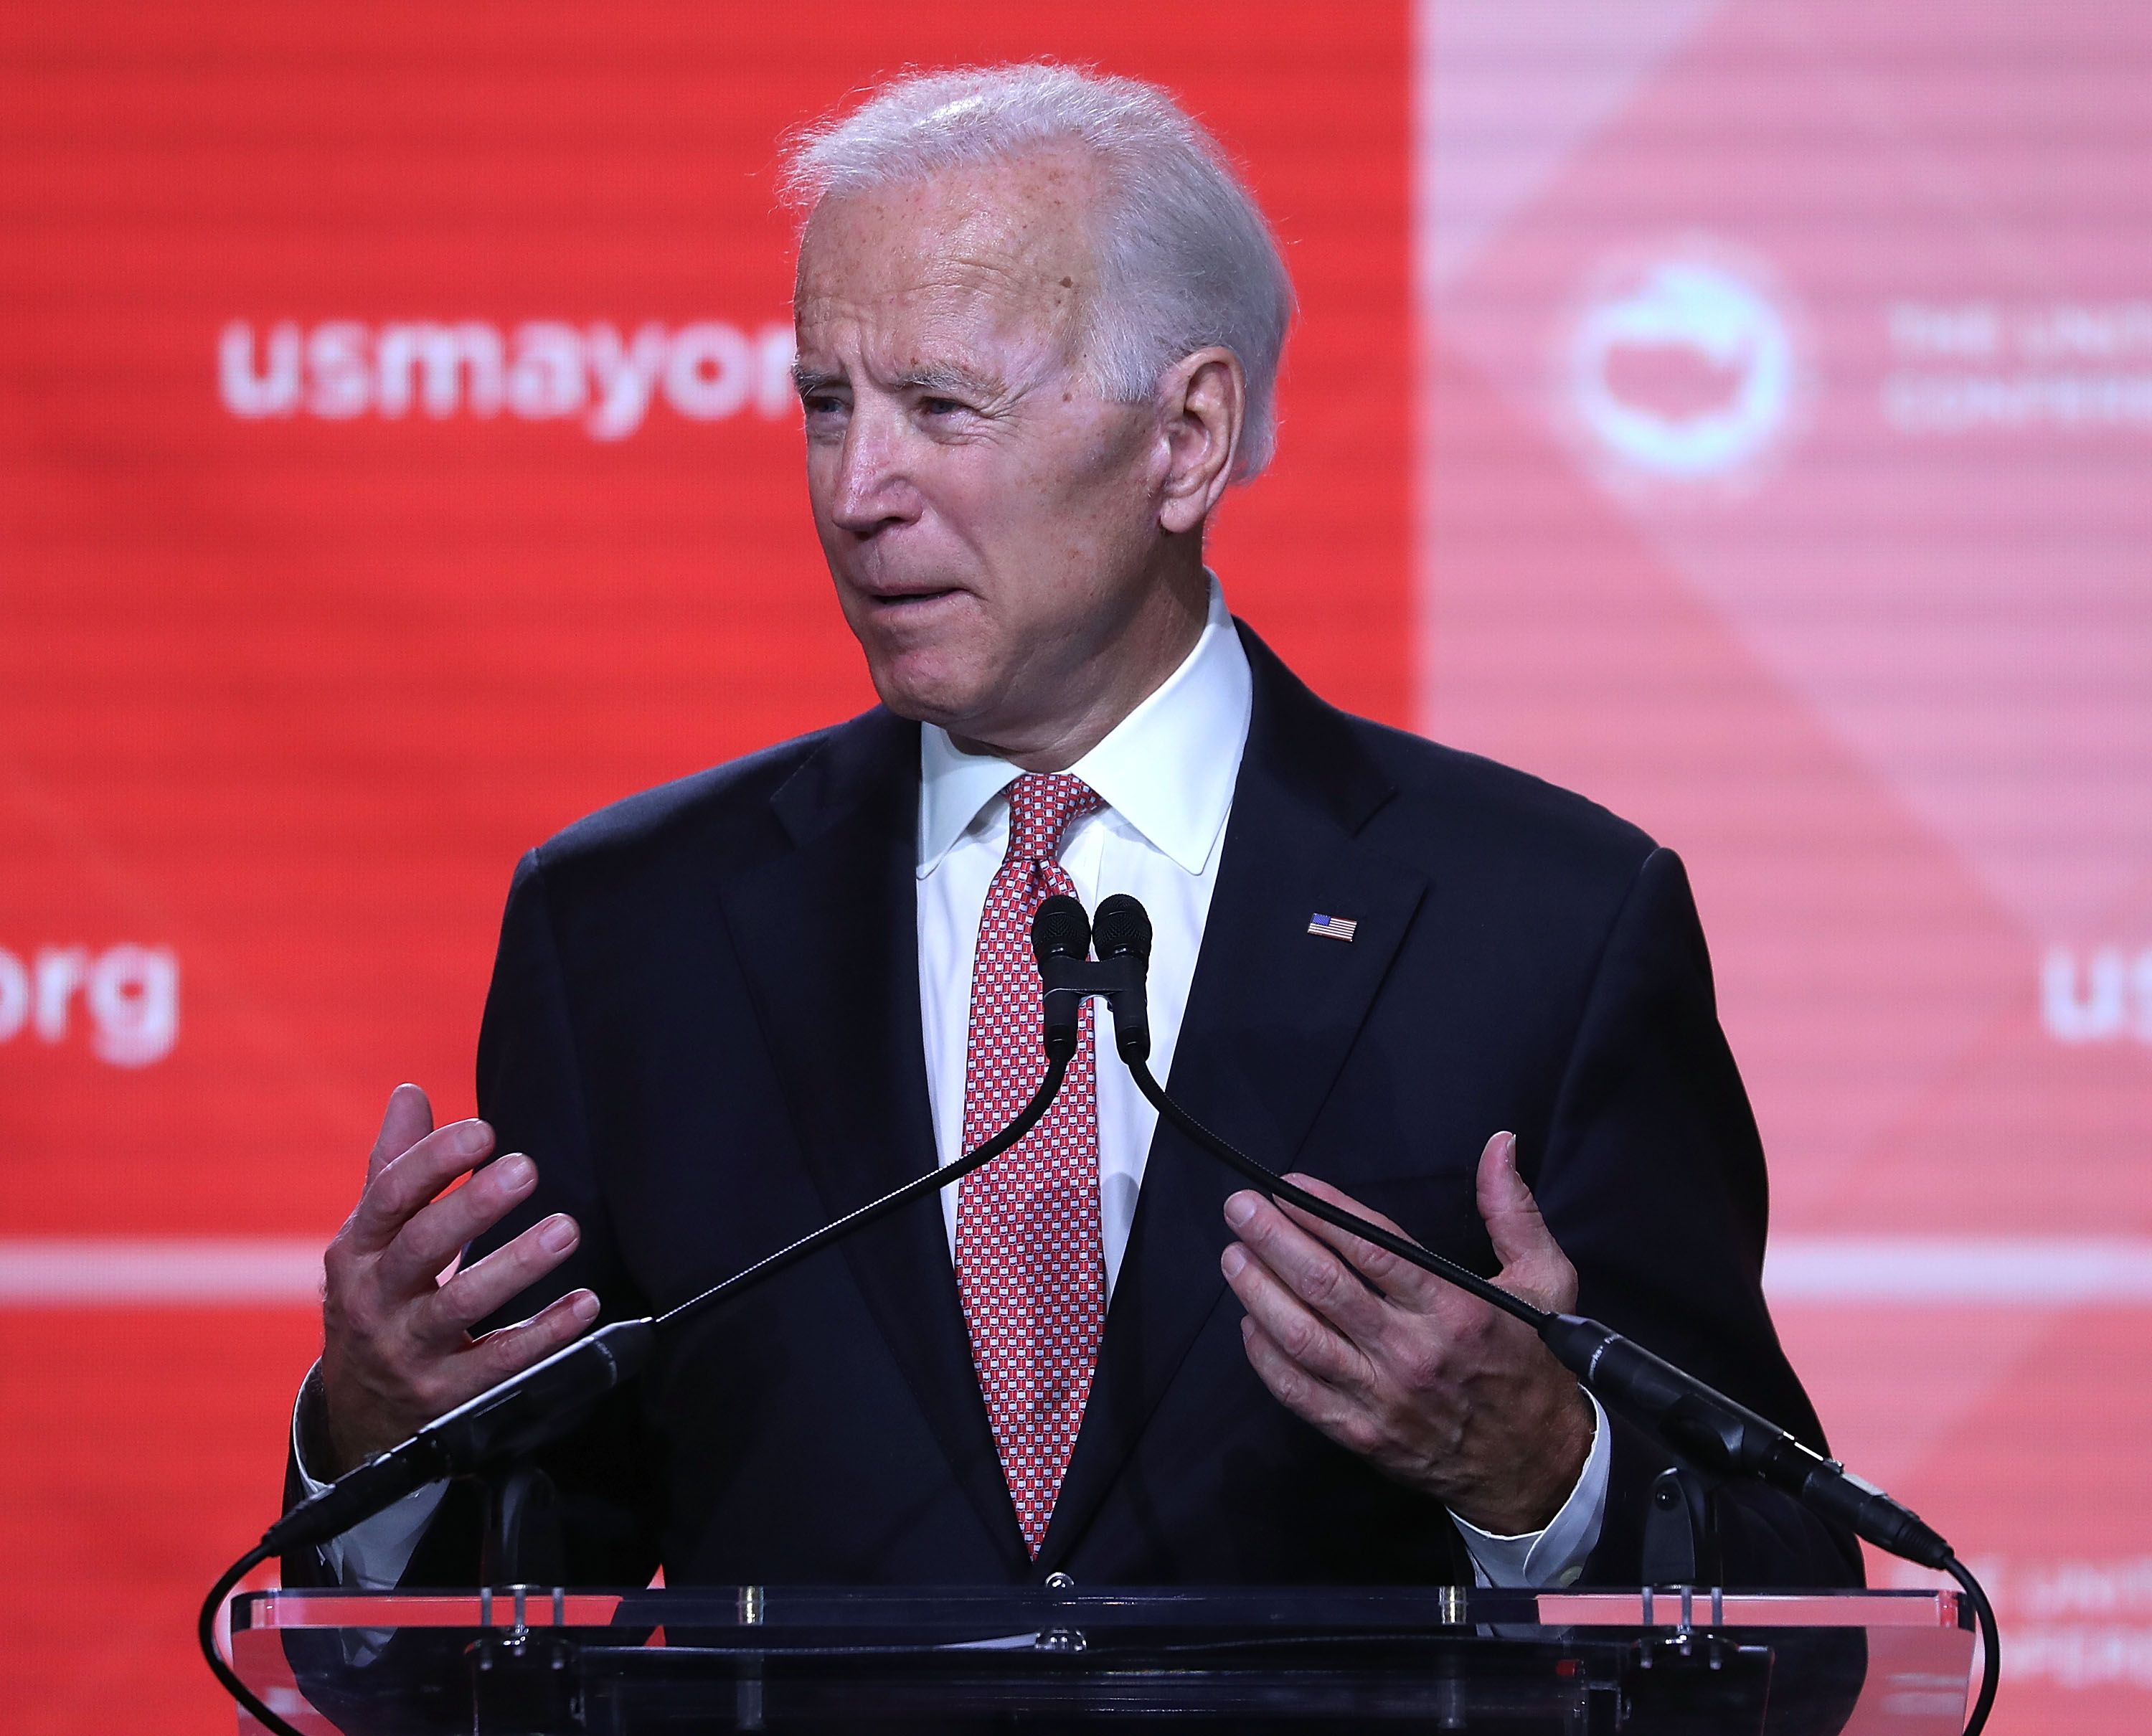 U.S. President Joe Biden spoke at the 87th United States Conference of Mayors Winter Meeting at the Capitol Hilton on January 24, 2019 | Photo: Getty Images